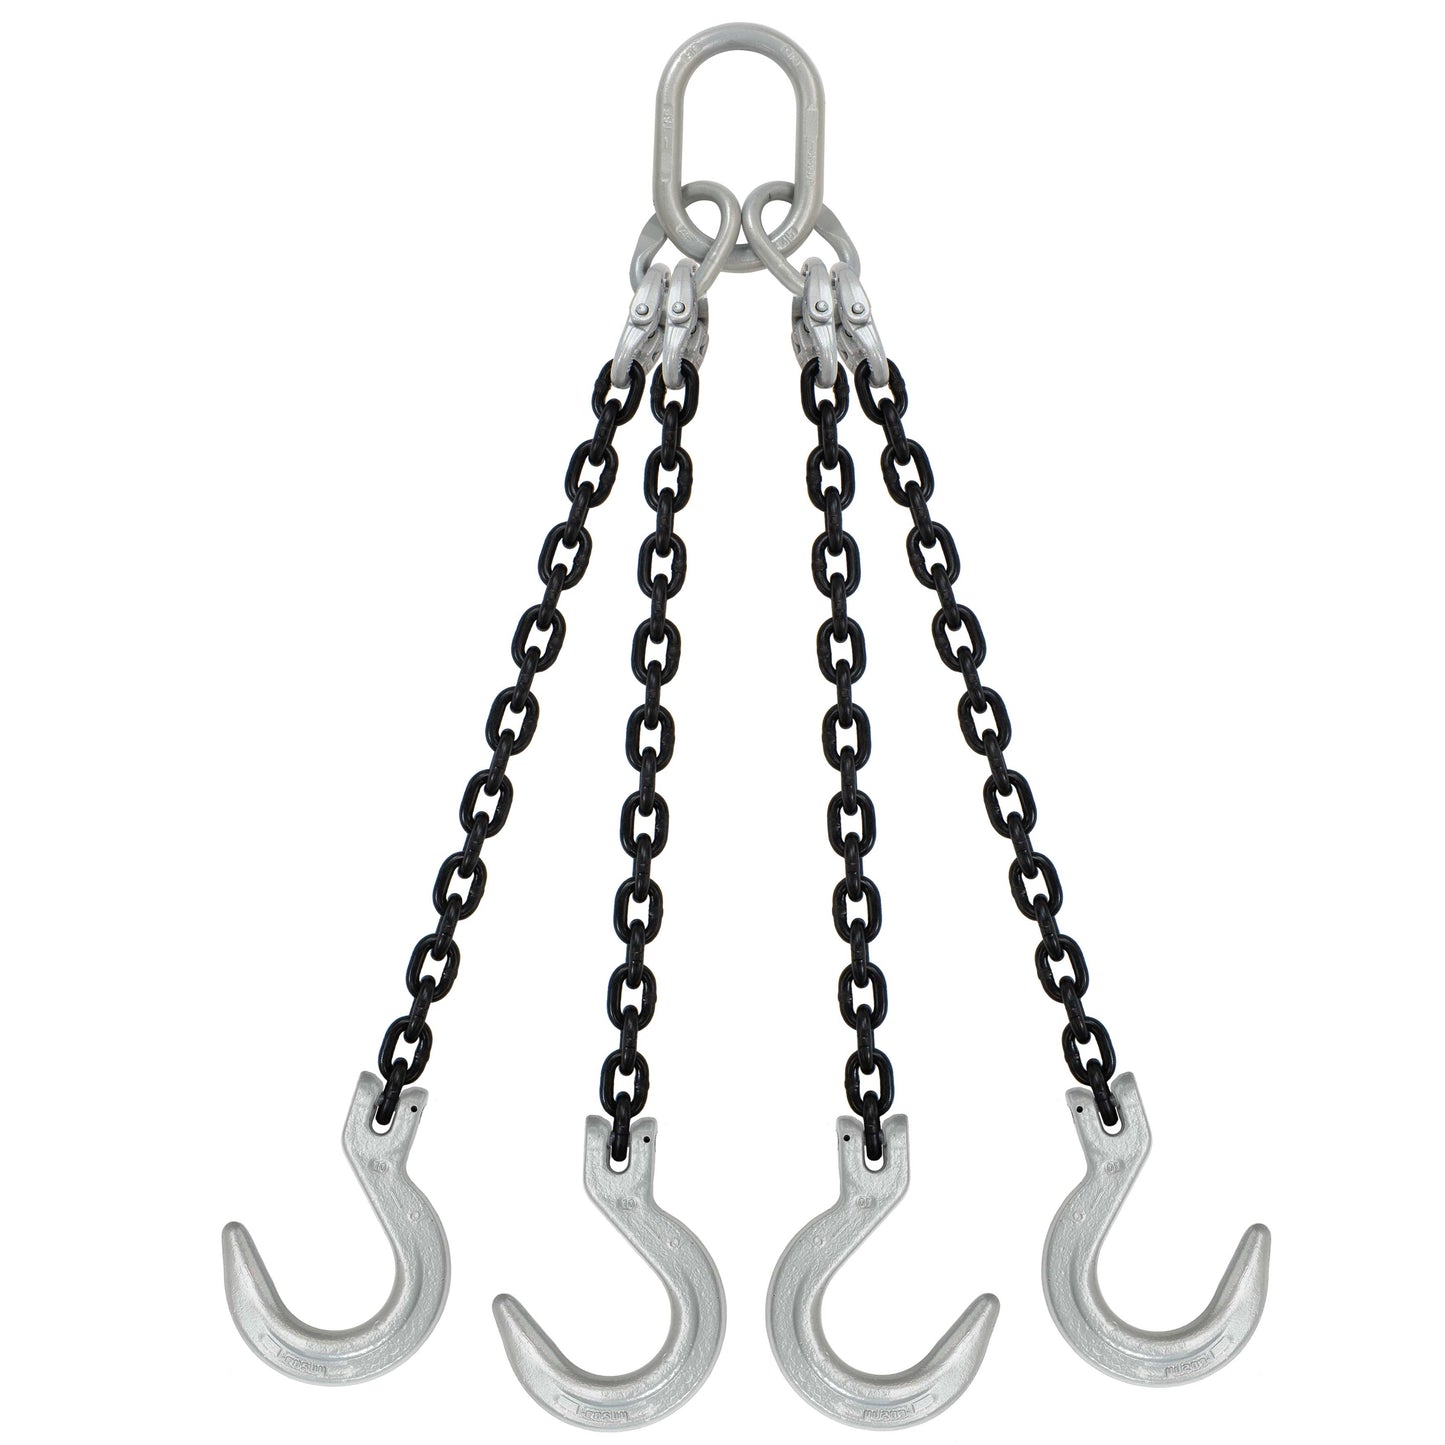 932 inch x 16 foot Domestic 4 Leg Chain Sling w Crosby Foundry Hooks Grade 100 image 1 of 2